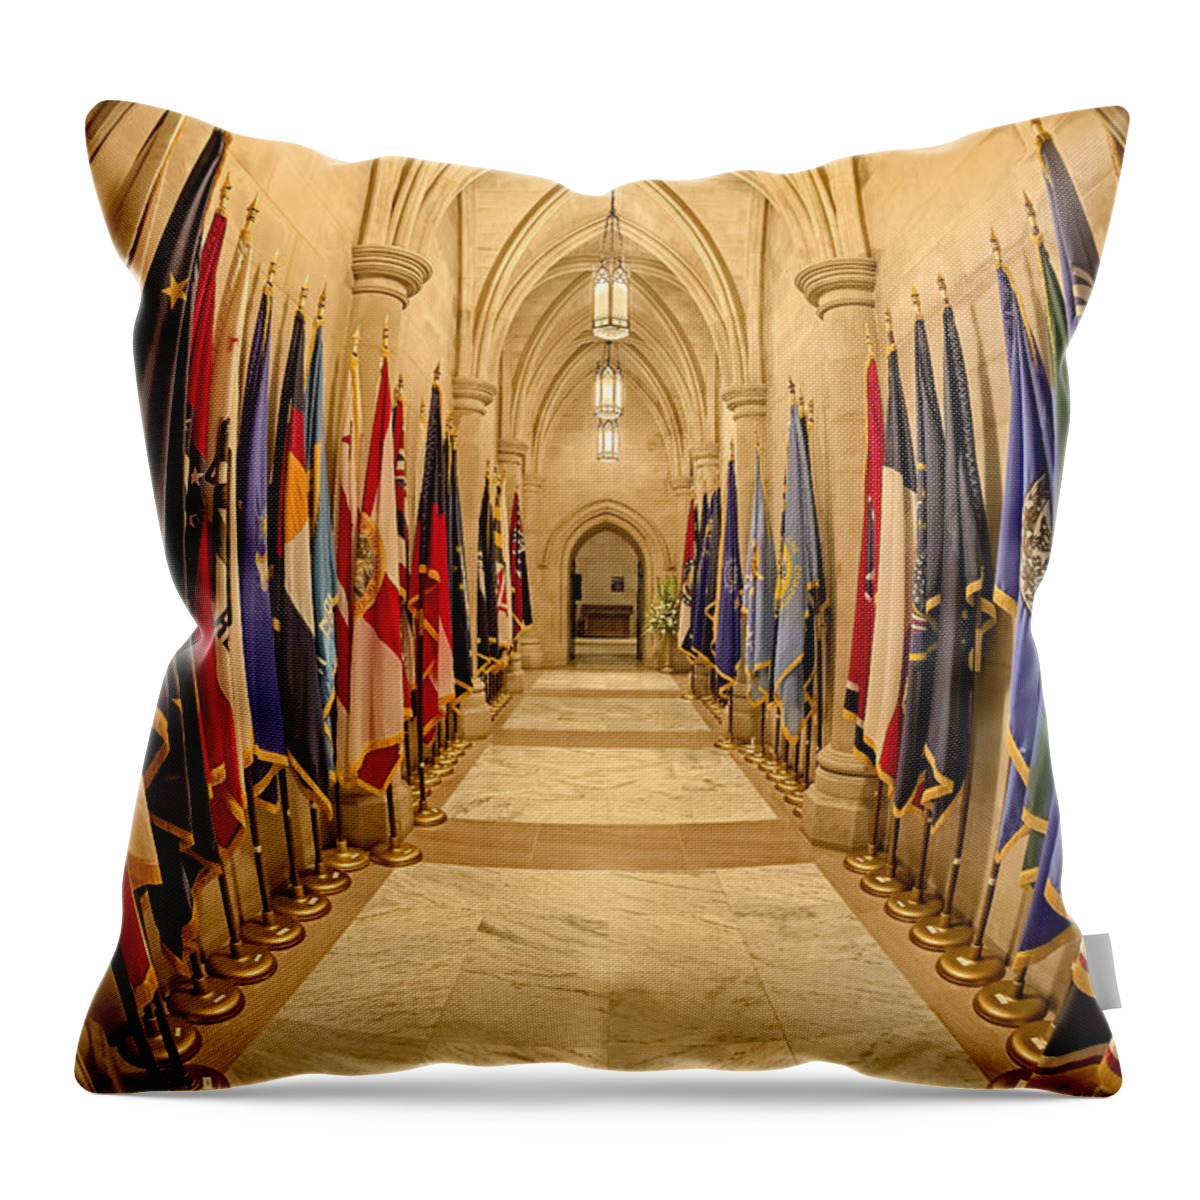 Washington National Cathedral Throw Pillow featuring the photograph Washington National Cathedral State Flags by Susan Candelario